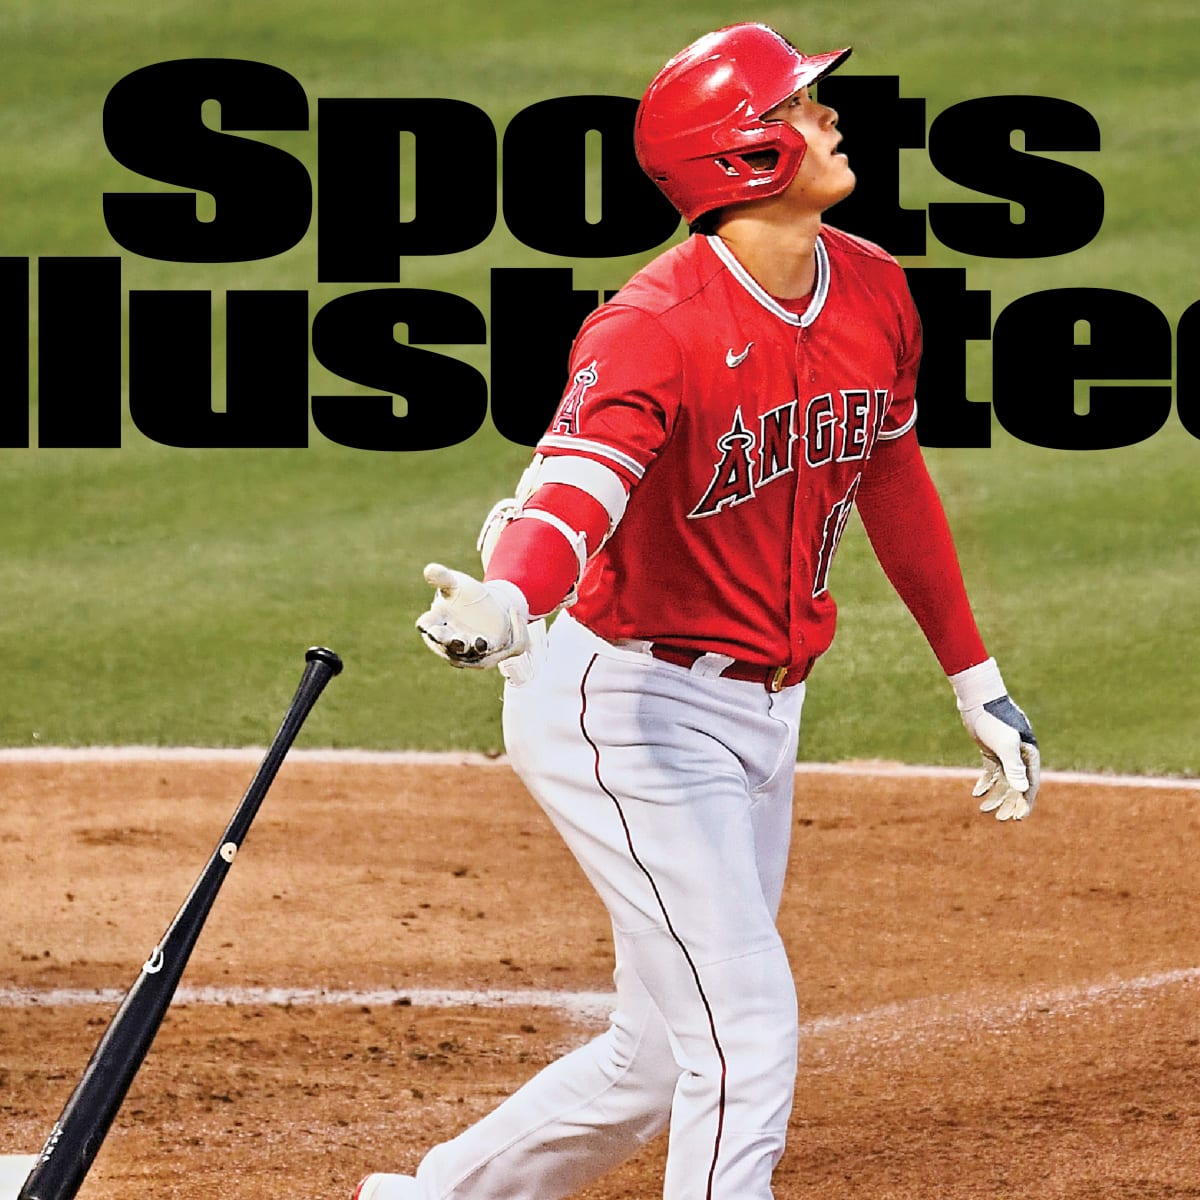 Two Sports Illustrated Covers for Shohei Ohtani; The Hitter & Pitcher - Sports  Illustrated Press Room